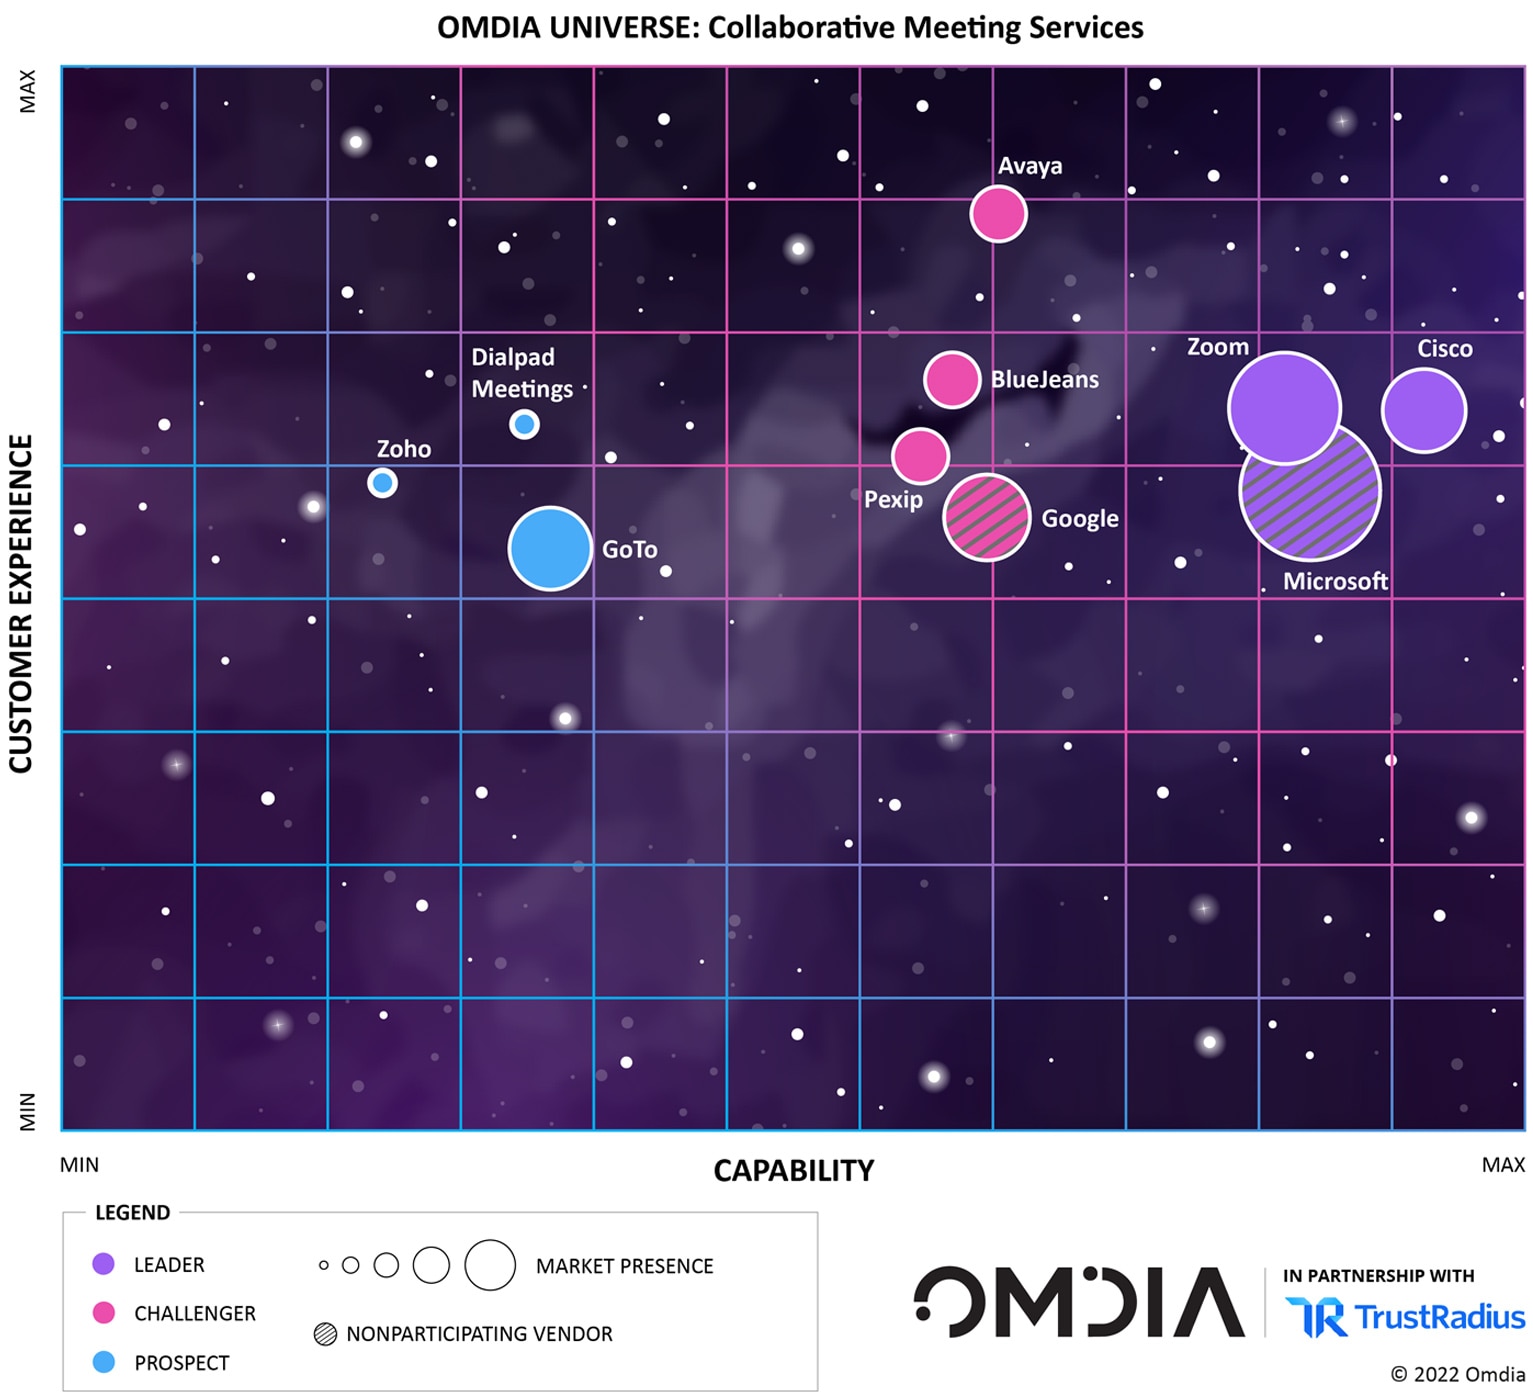 A graphic details Omdia Universe’s assessment of collaborative meeting services, noting Cisco as a leader.